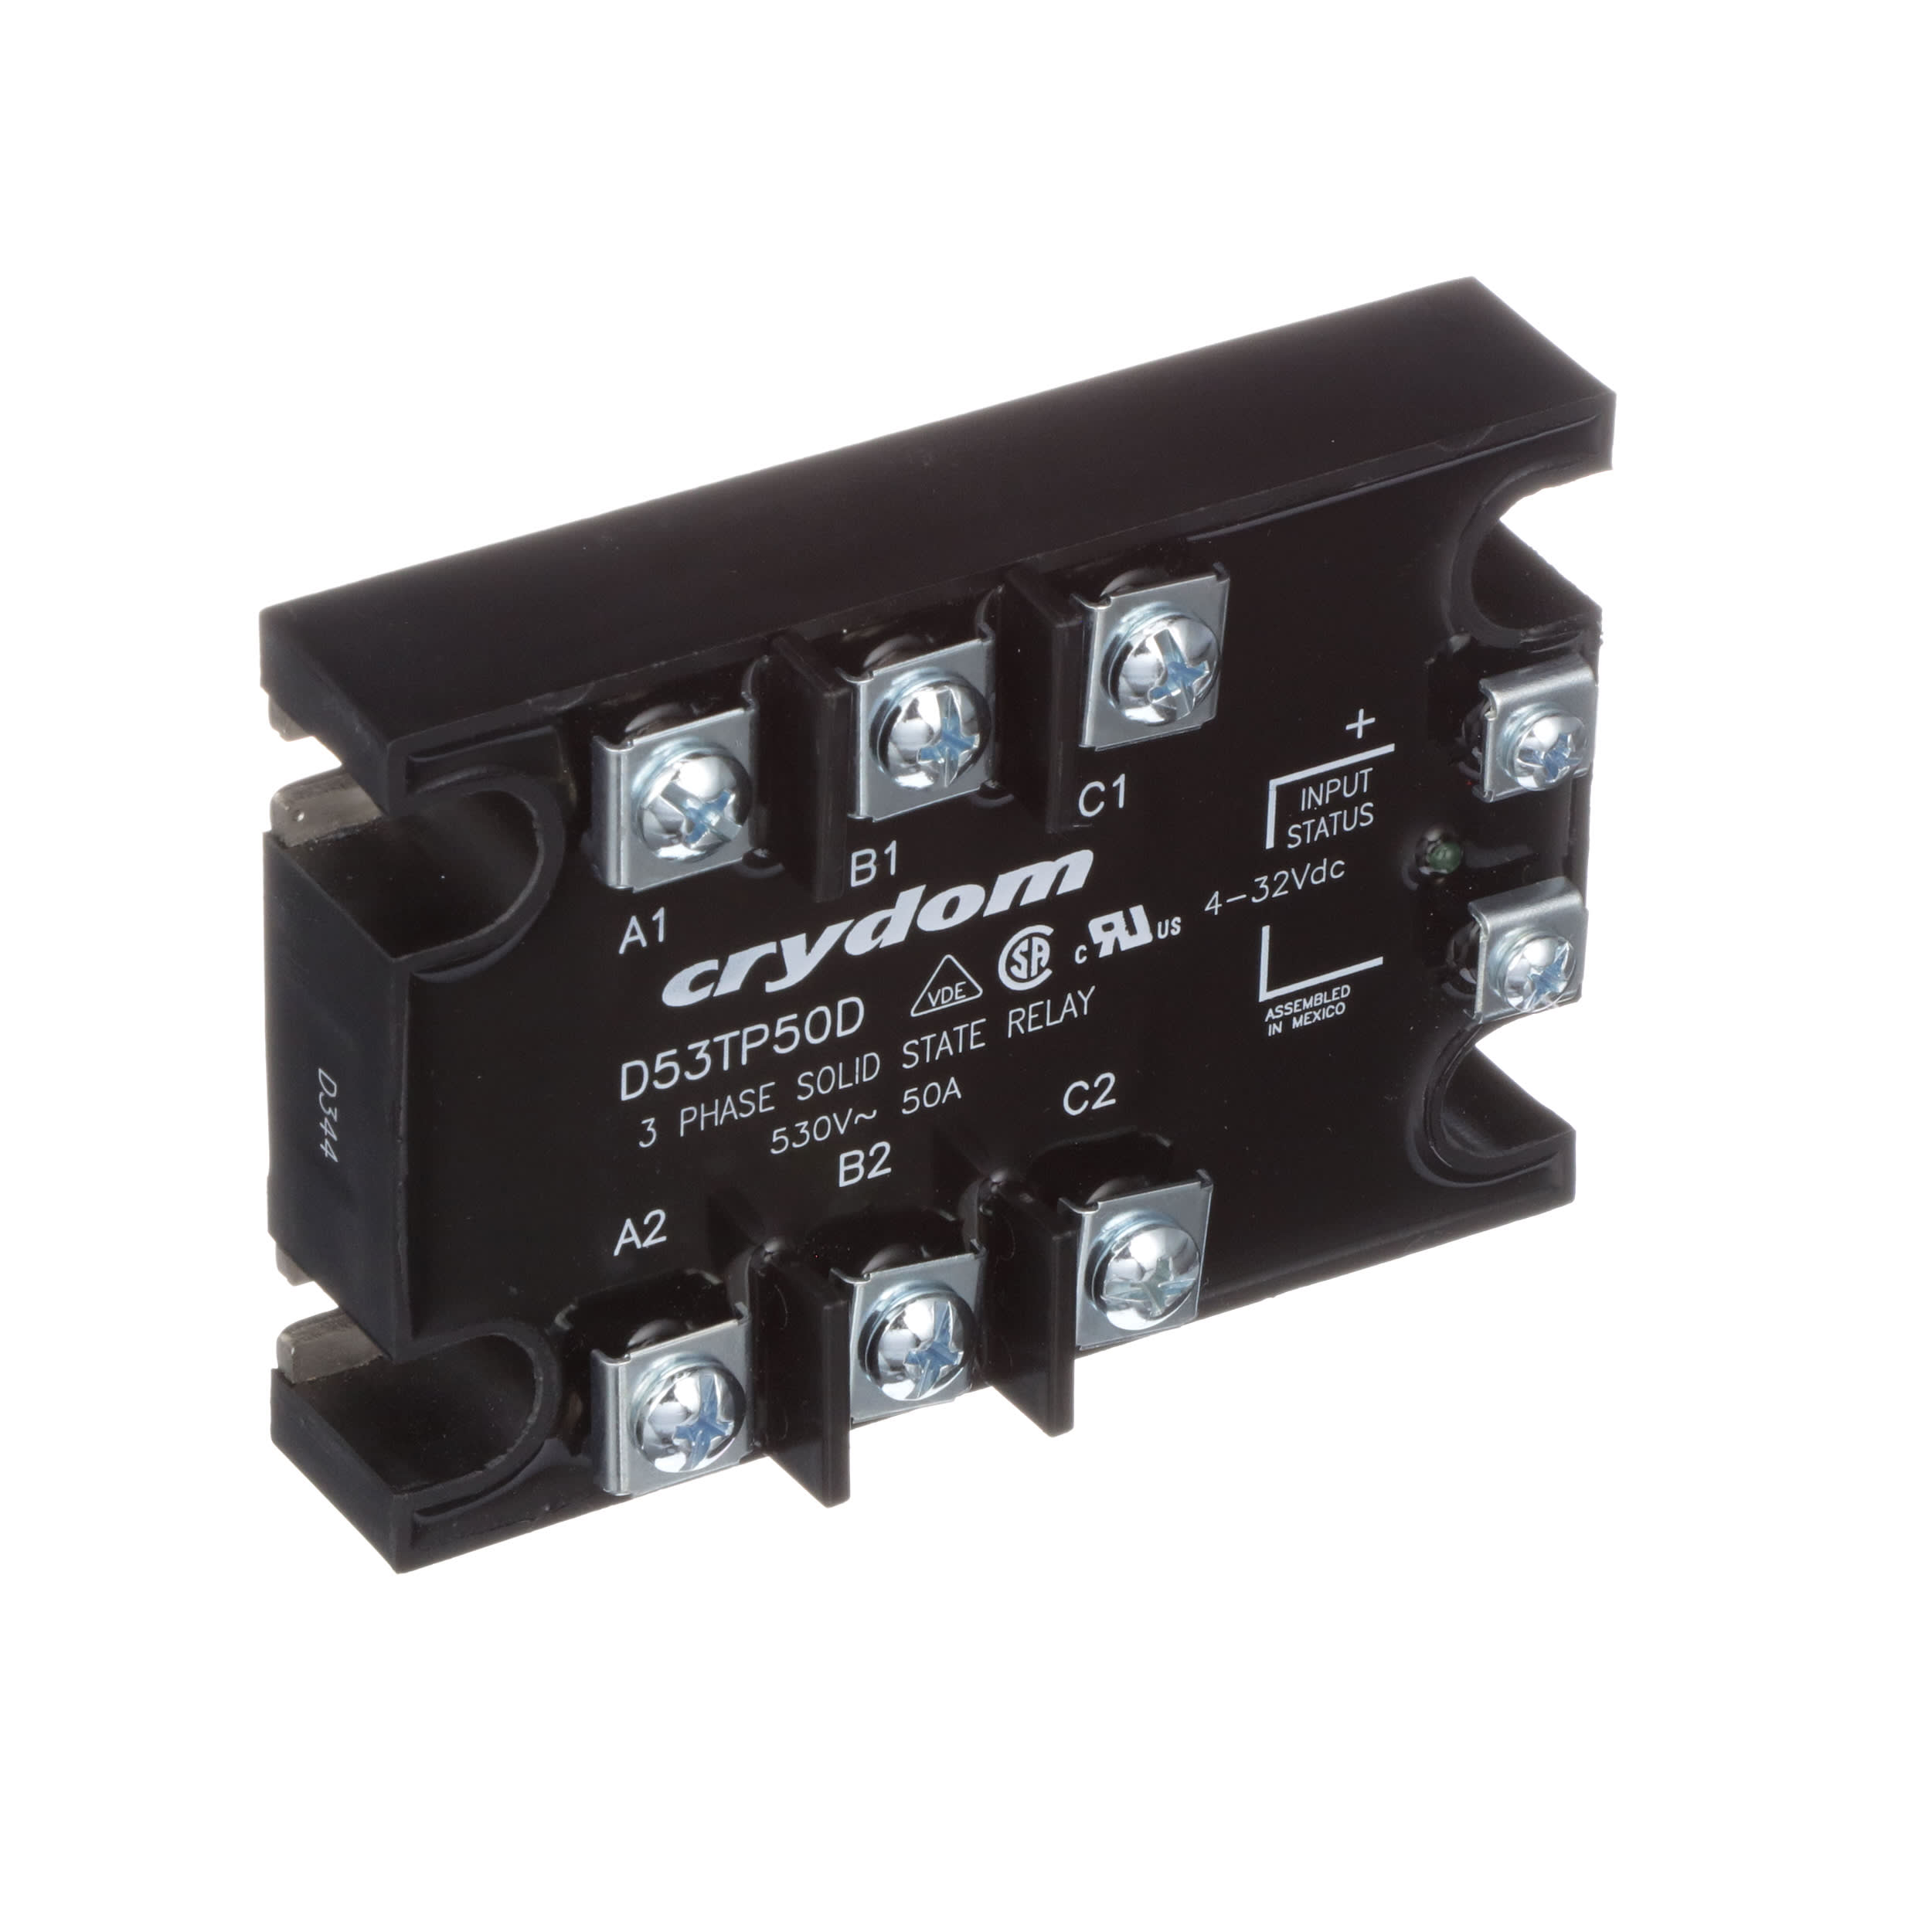 1PC Neu Crydom solid state relay D53TP50D 